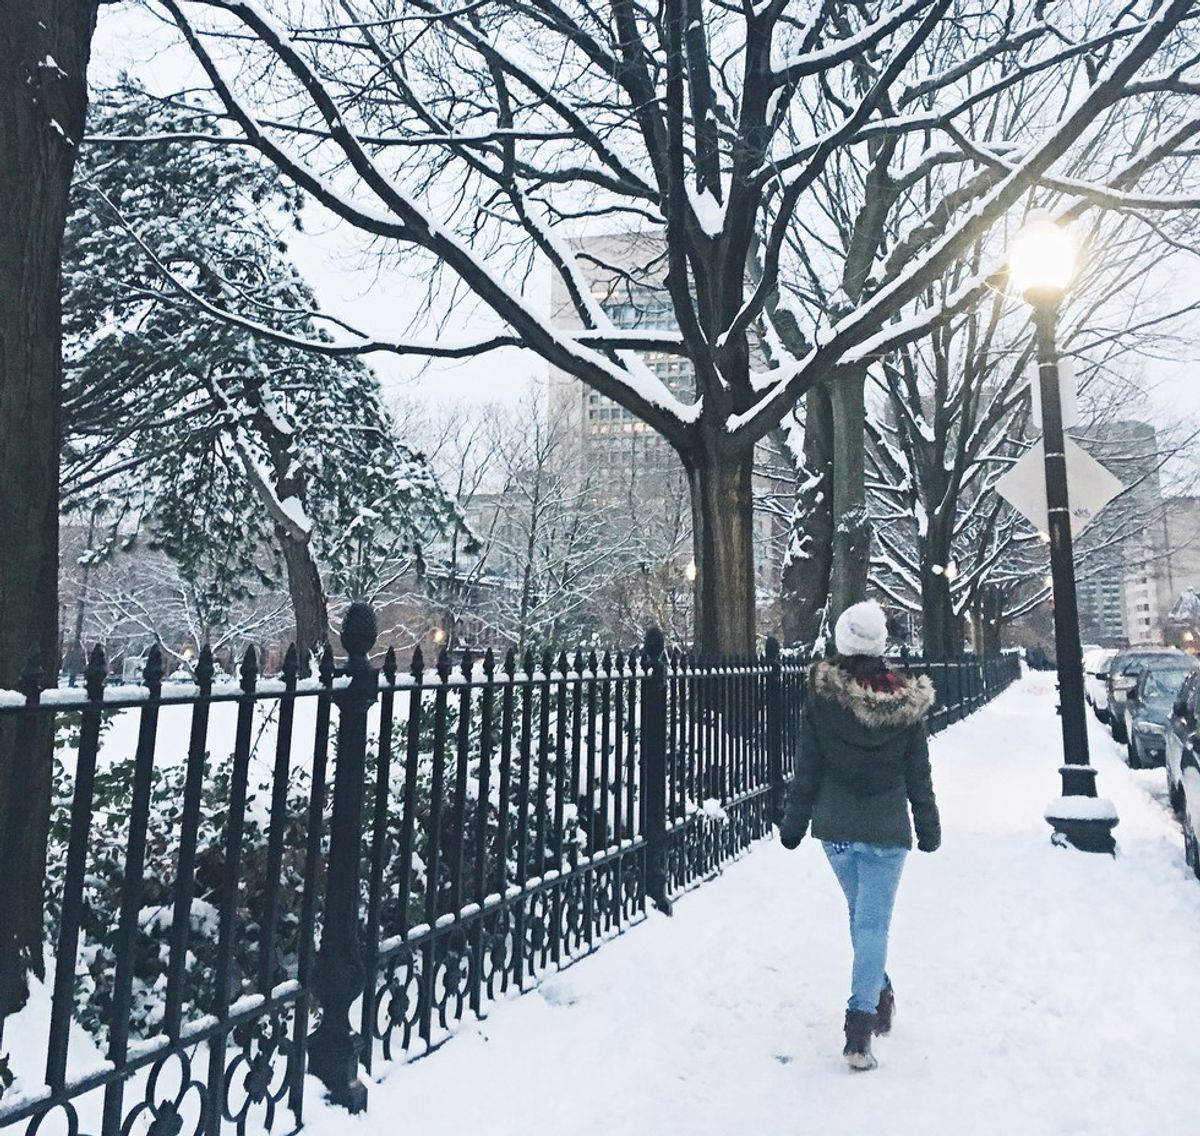 21 Songs to Feed Your Soul This Winter